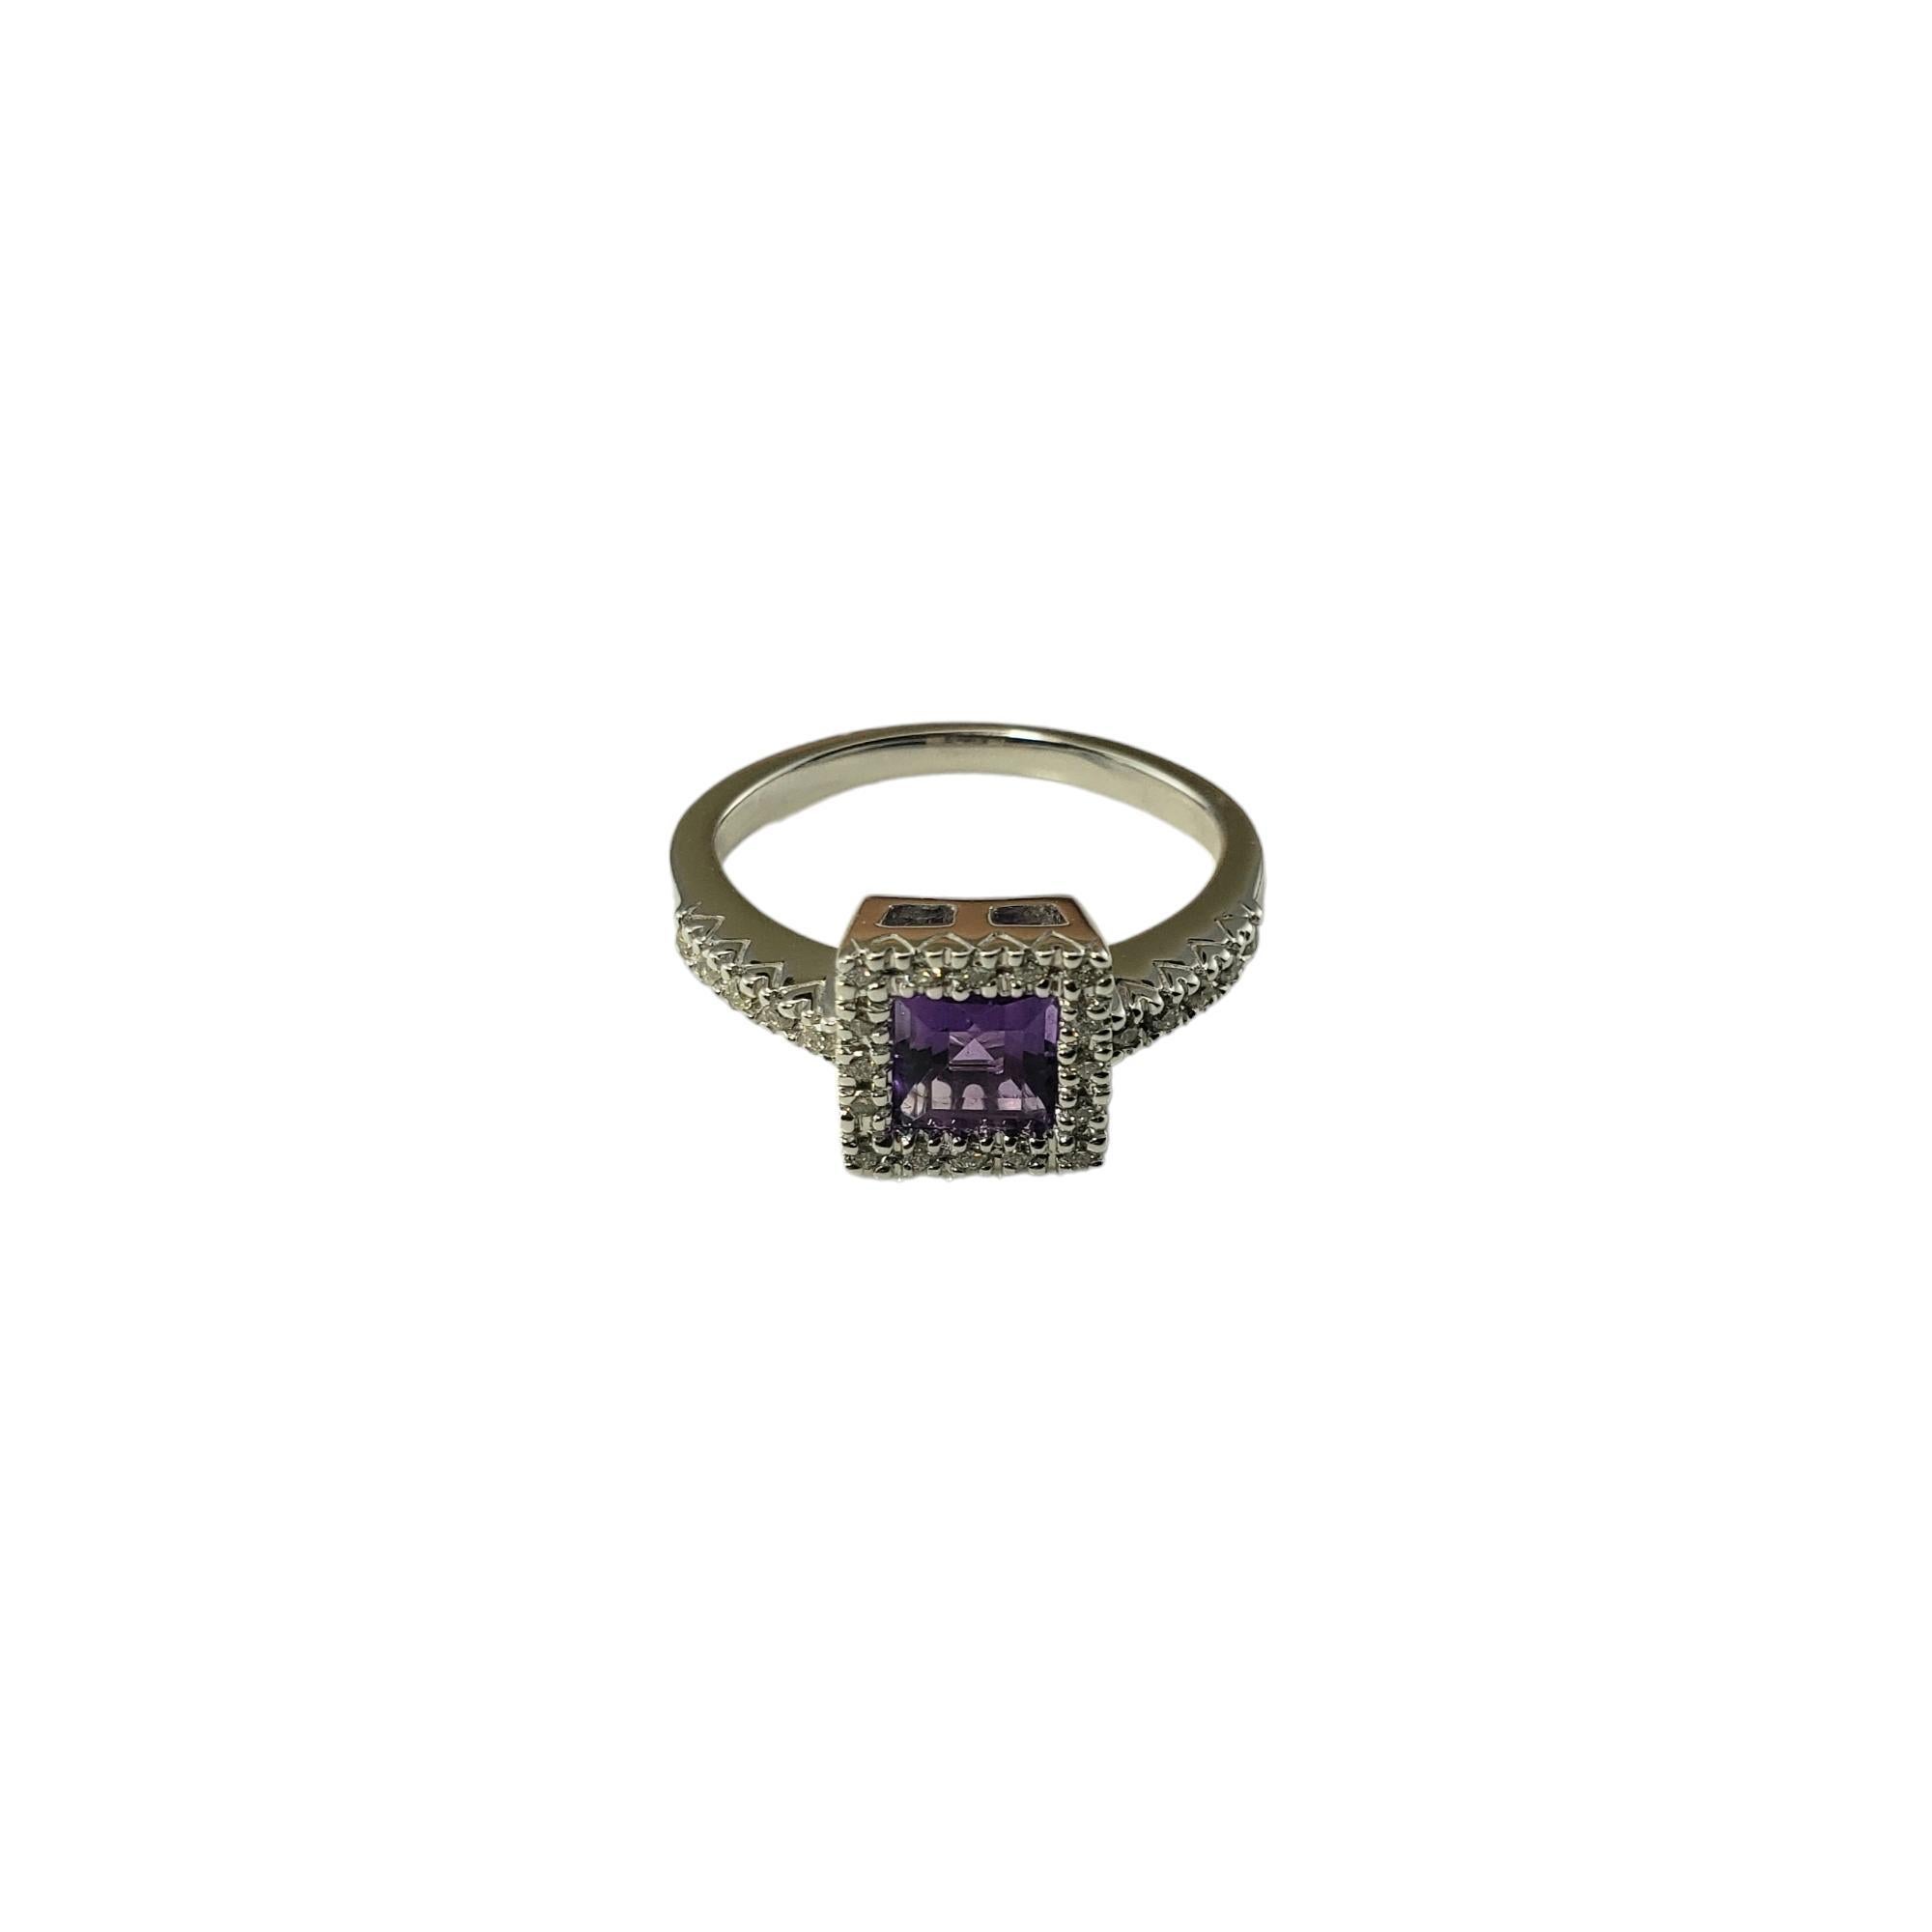 Vintage 14 Karat White Gold Amethyst and Diamond Ring Size 5-

This elegant ring features square cut amethyst (5 mm x 5 mm) and 26 round brilliant cut diamonds set in classic 14K white gold.  Width: 8.5 mm.  Shank: 2 mm.

Approximate total diamond